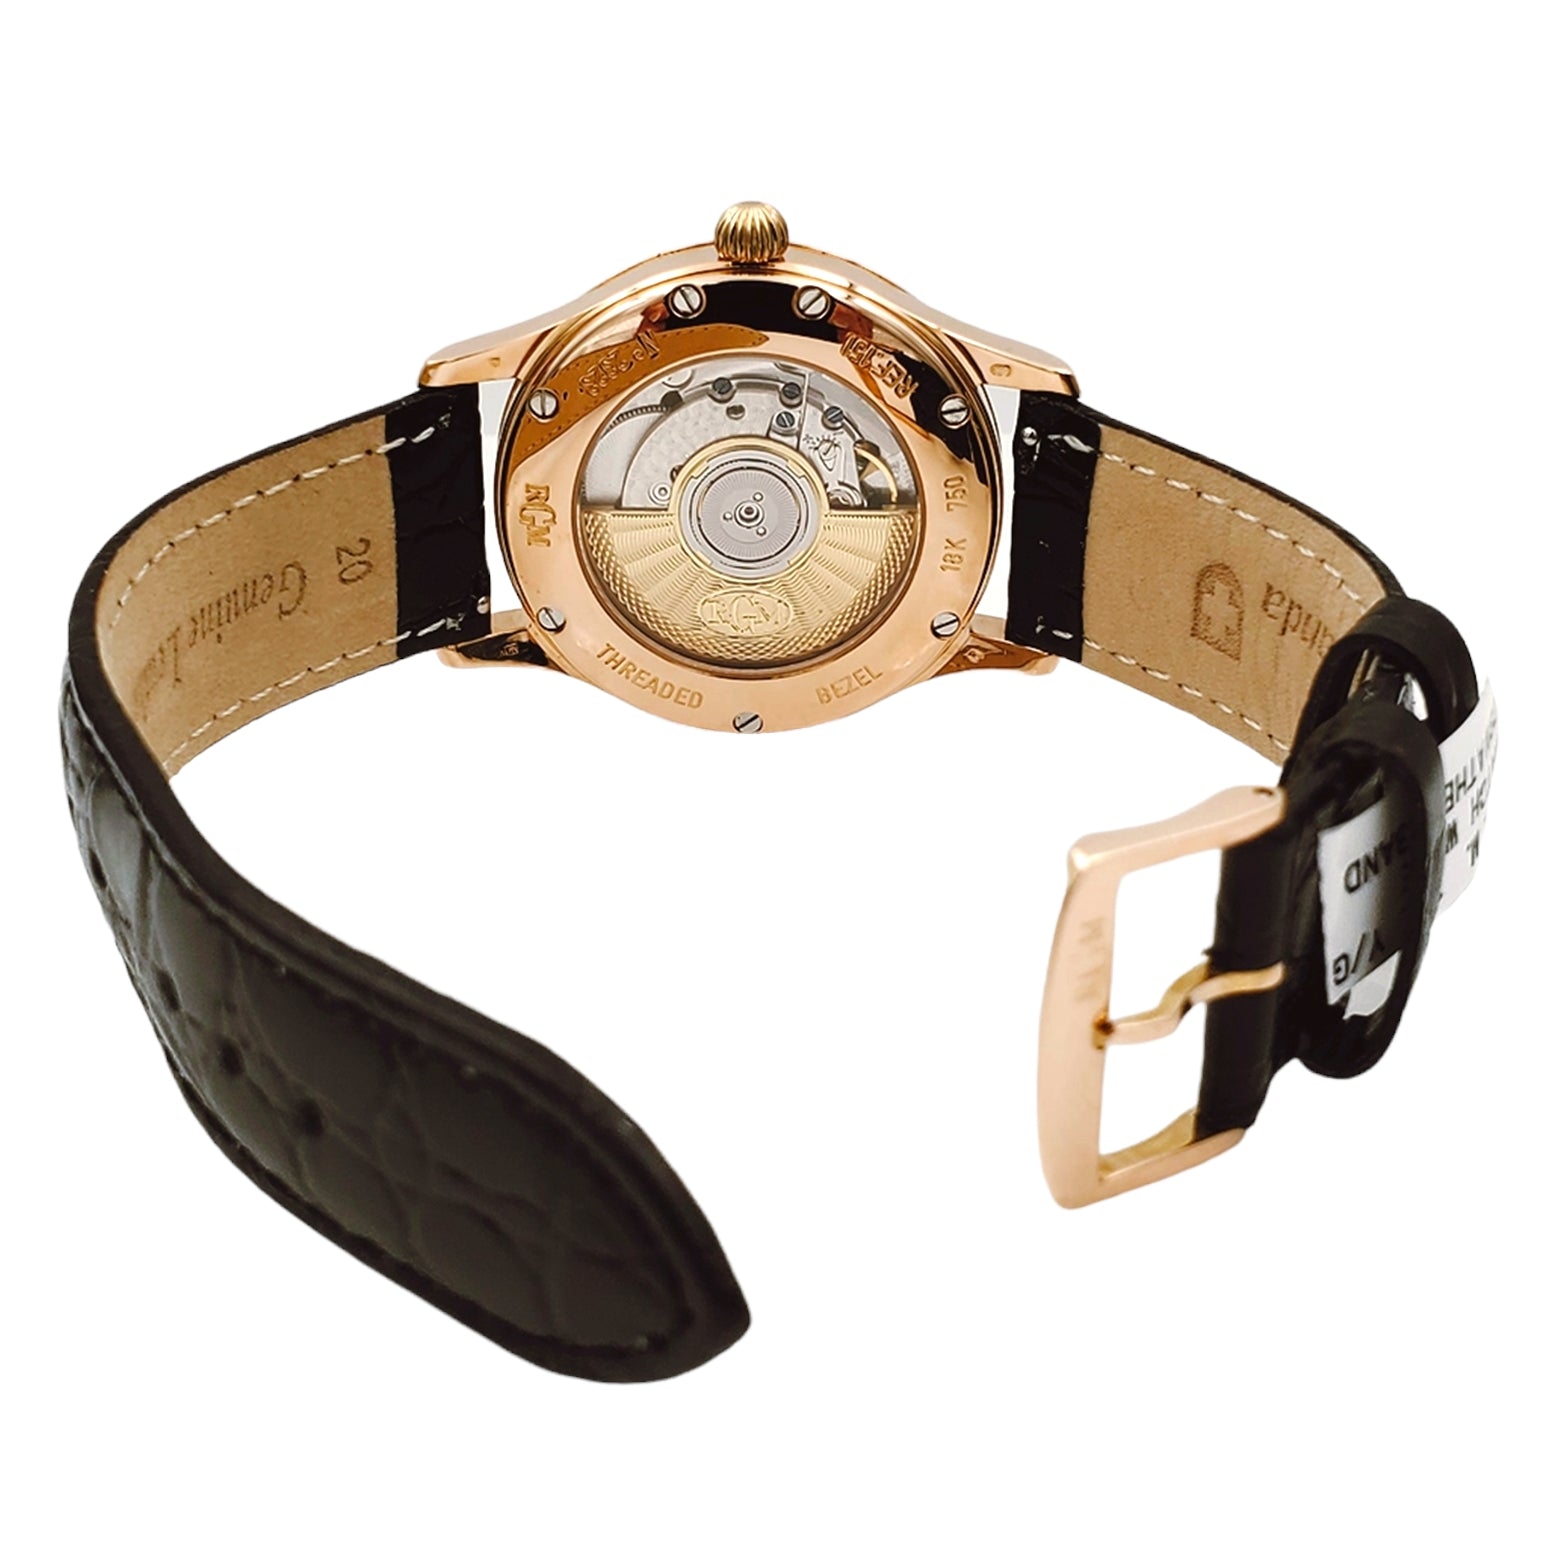 *Men's RGM 38mm - 18K Rose Gold Watch with Black Leather Band and Silver Dial. (Pre-Owned Model RGM 151-E)